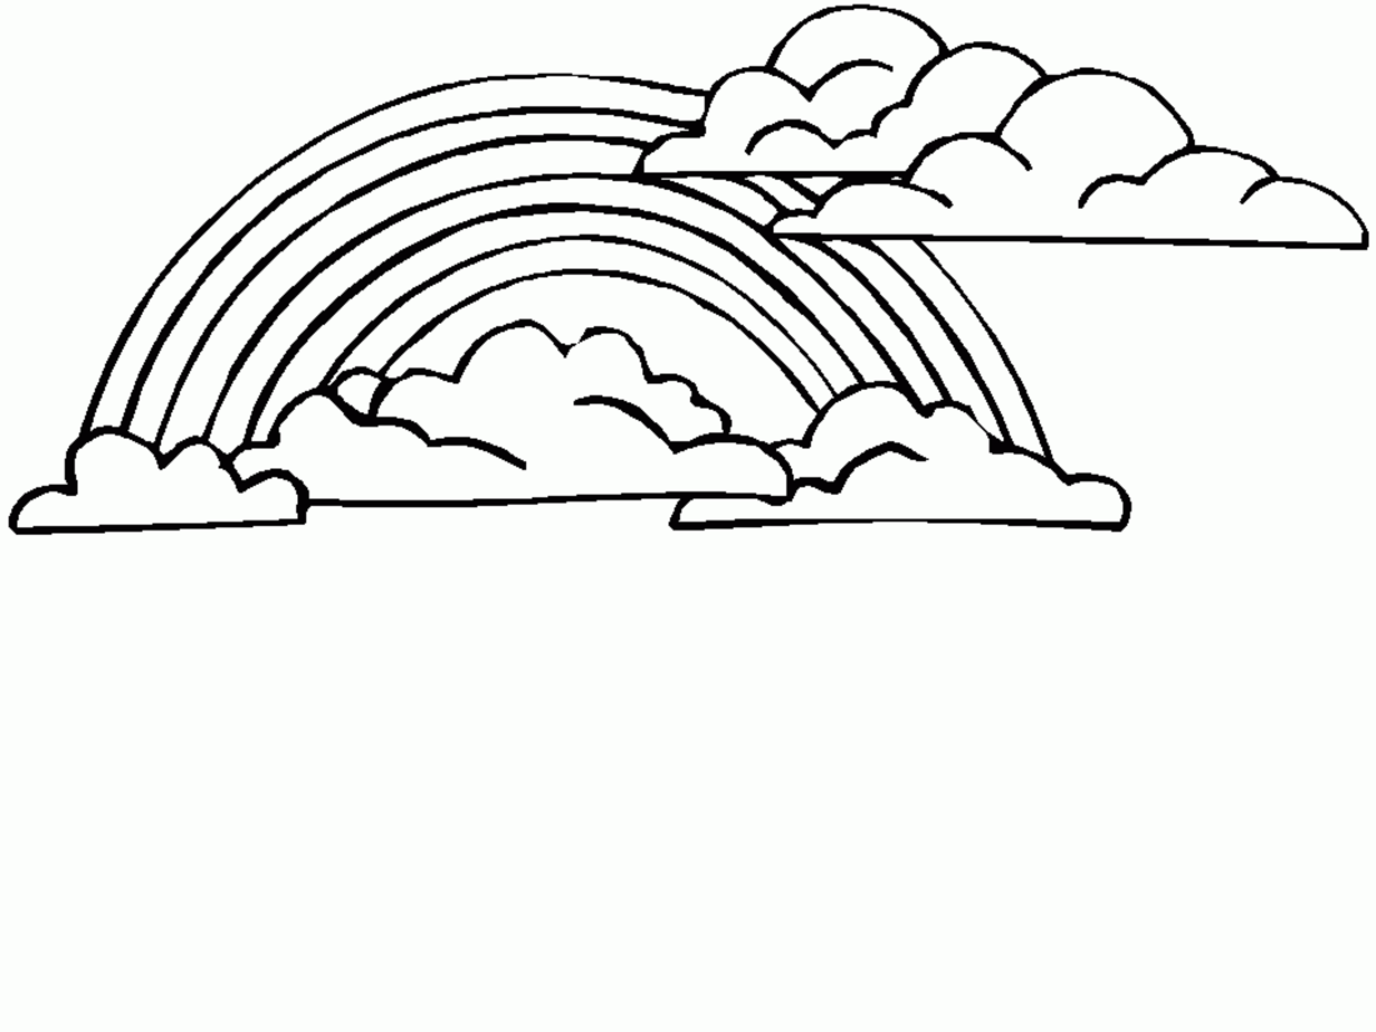 Coloring Page Of A Rainbow - Coloring Pages for Kids and for Adults